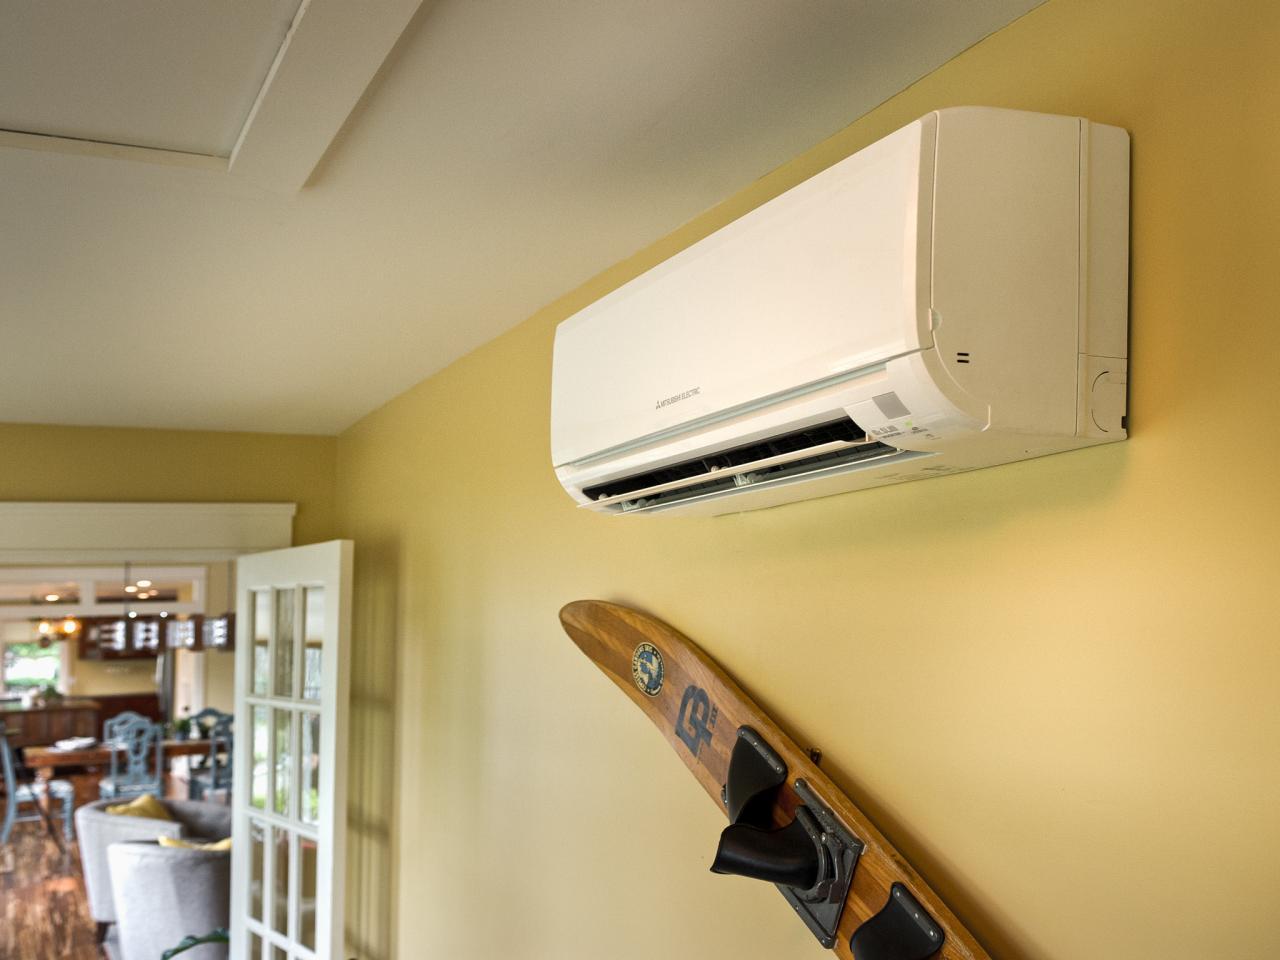 The Most Important Features You Should Consider for Air Conditioners